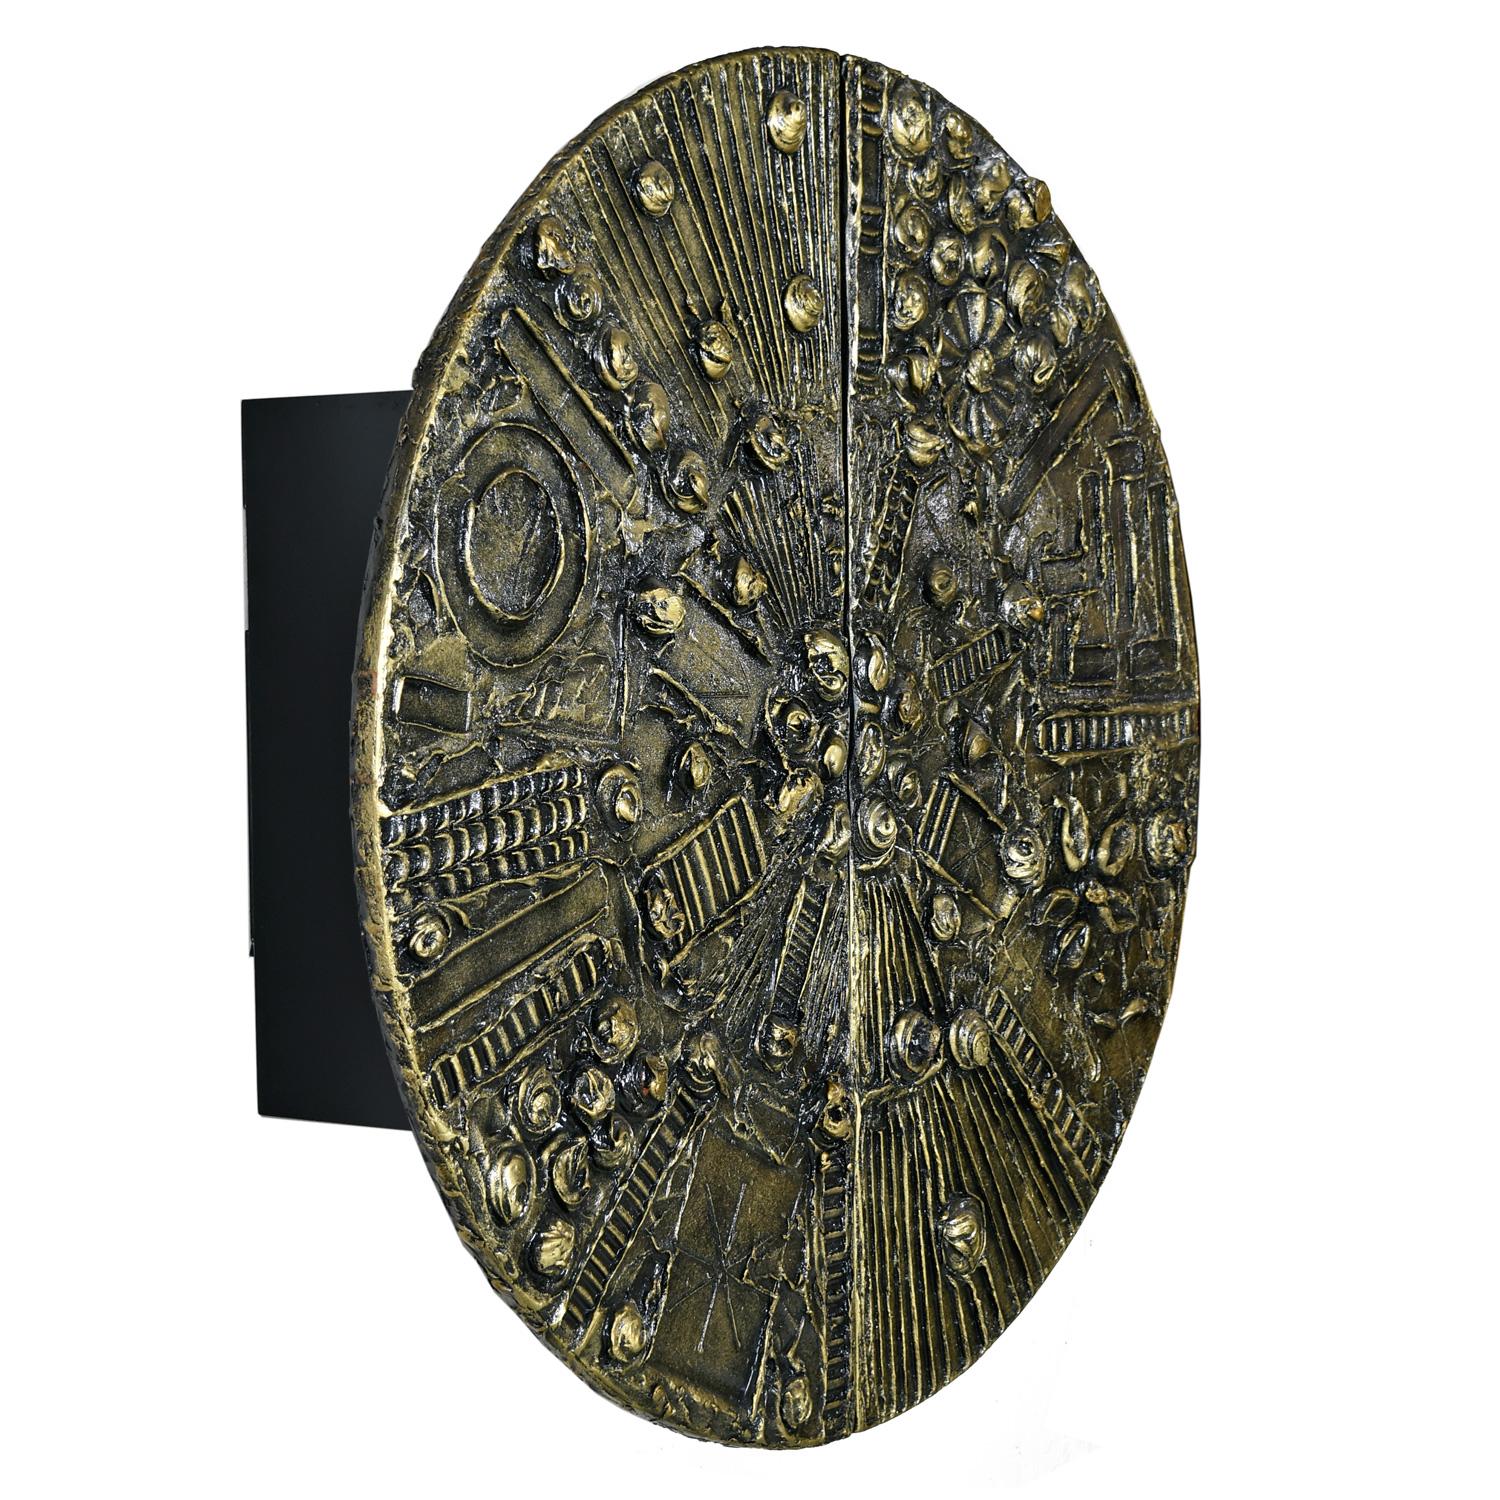 Did you ever wonder where Darth Vader stored his high-end Scotch before his Death Star was destroyed?  Well, wonder no more.  This sinister medallion is not only hard to find, but we promise you won't come across a nicer version of this Adrian